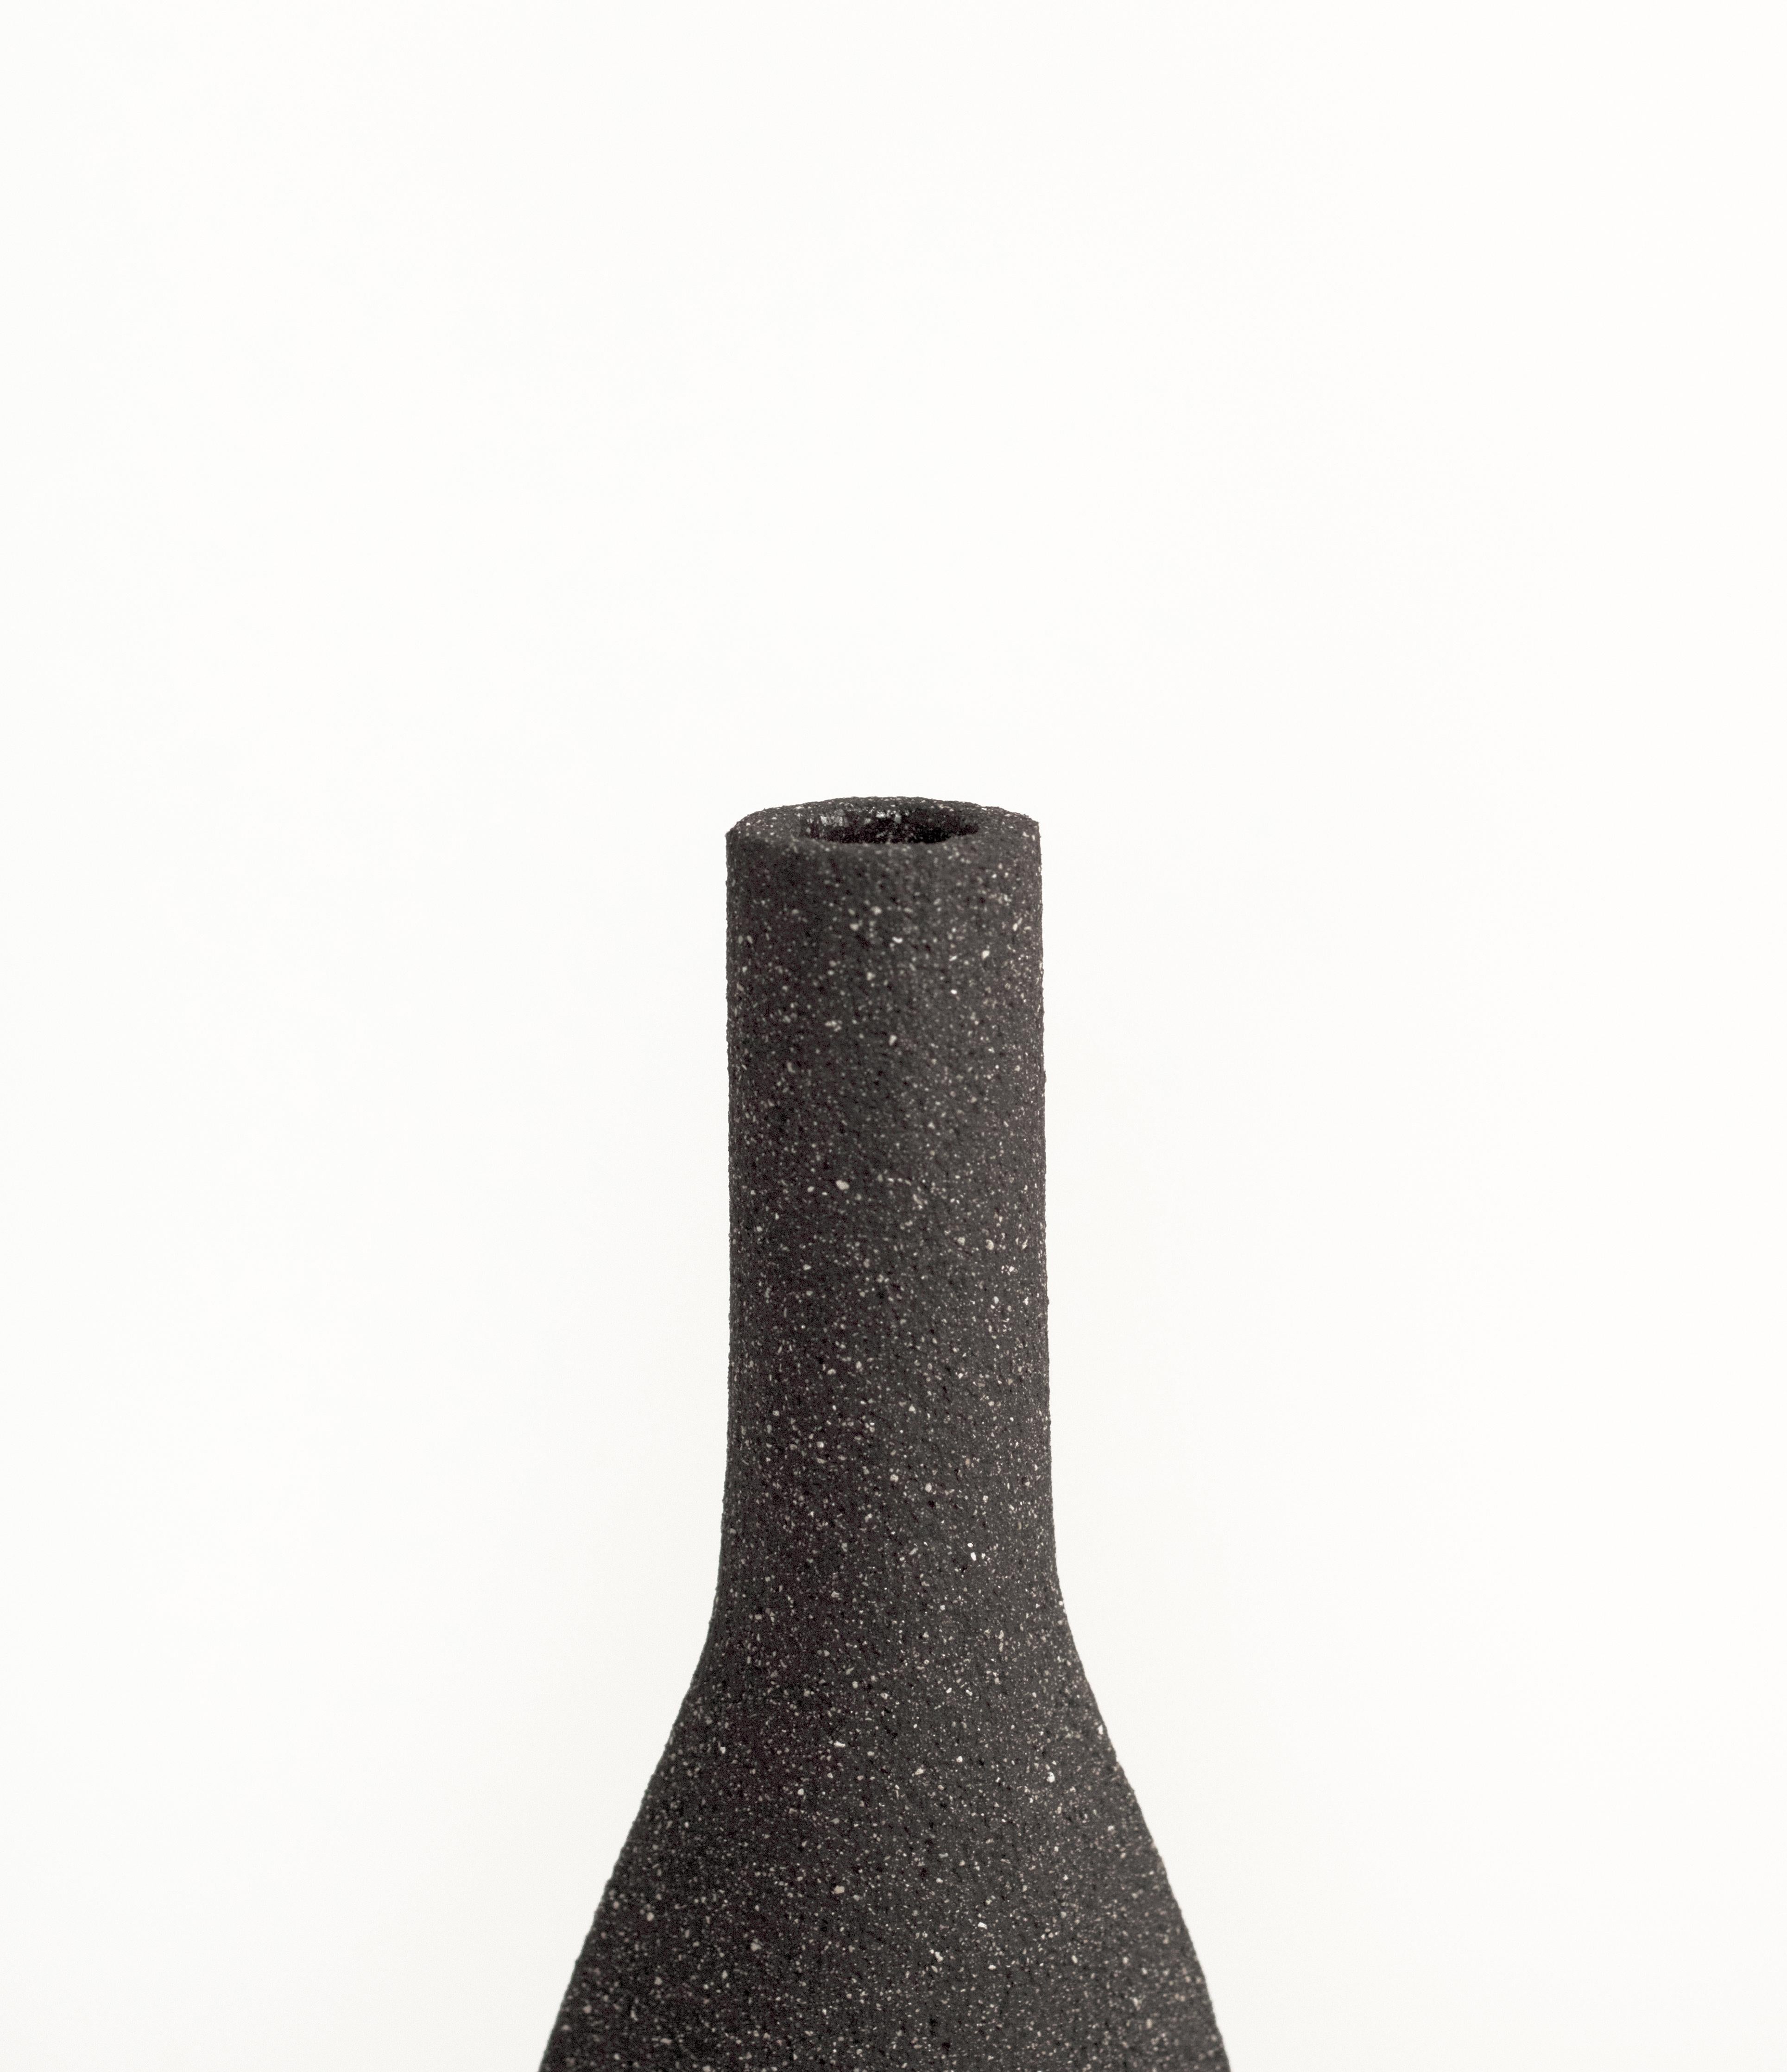 Minimalist 21st Century Bouteille 'S' Vase in Black Ceramic, Hand-Crafted in France